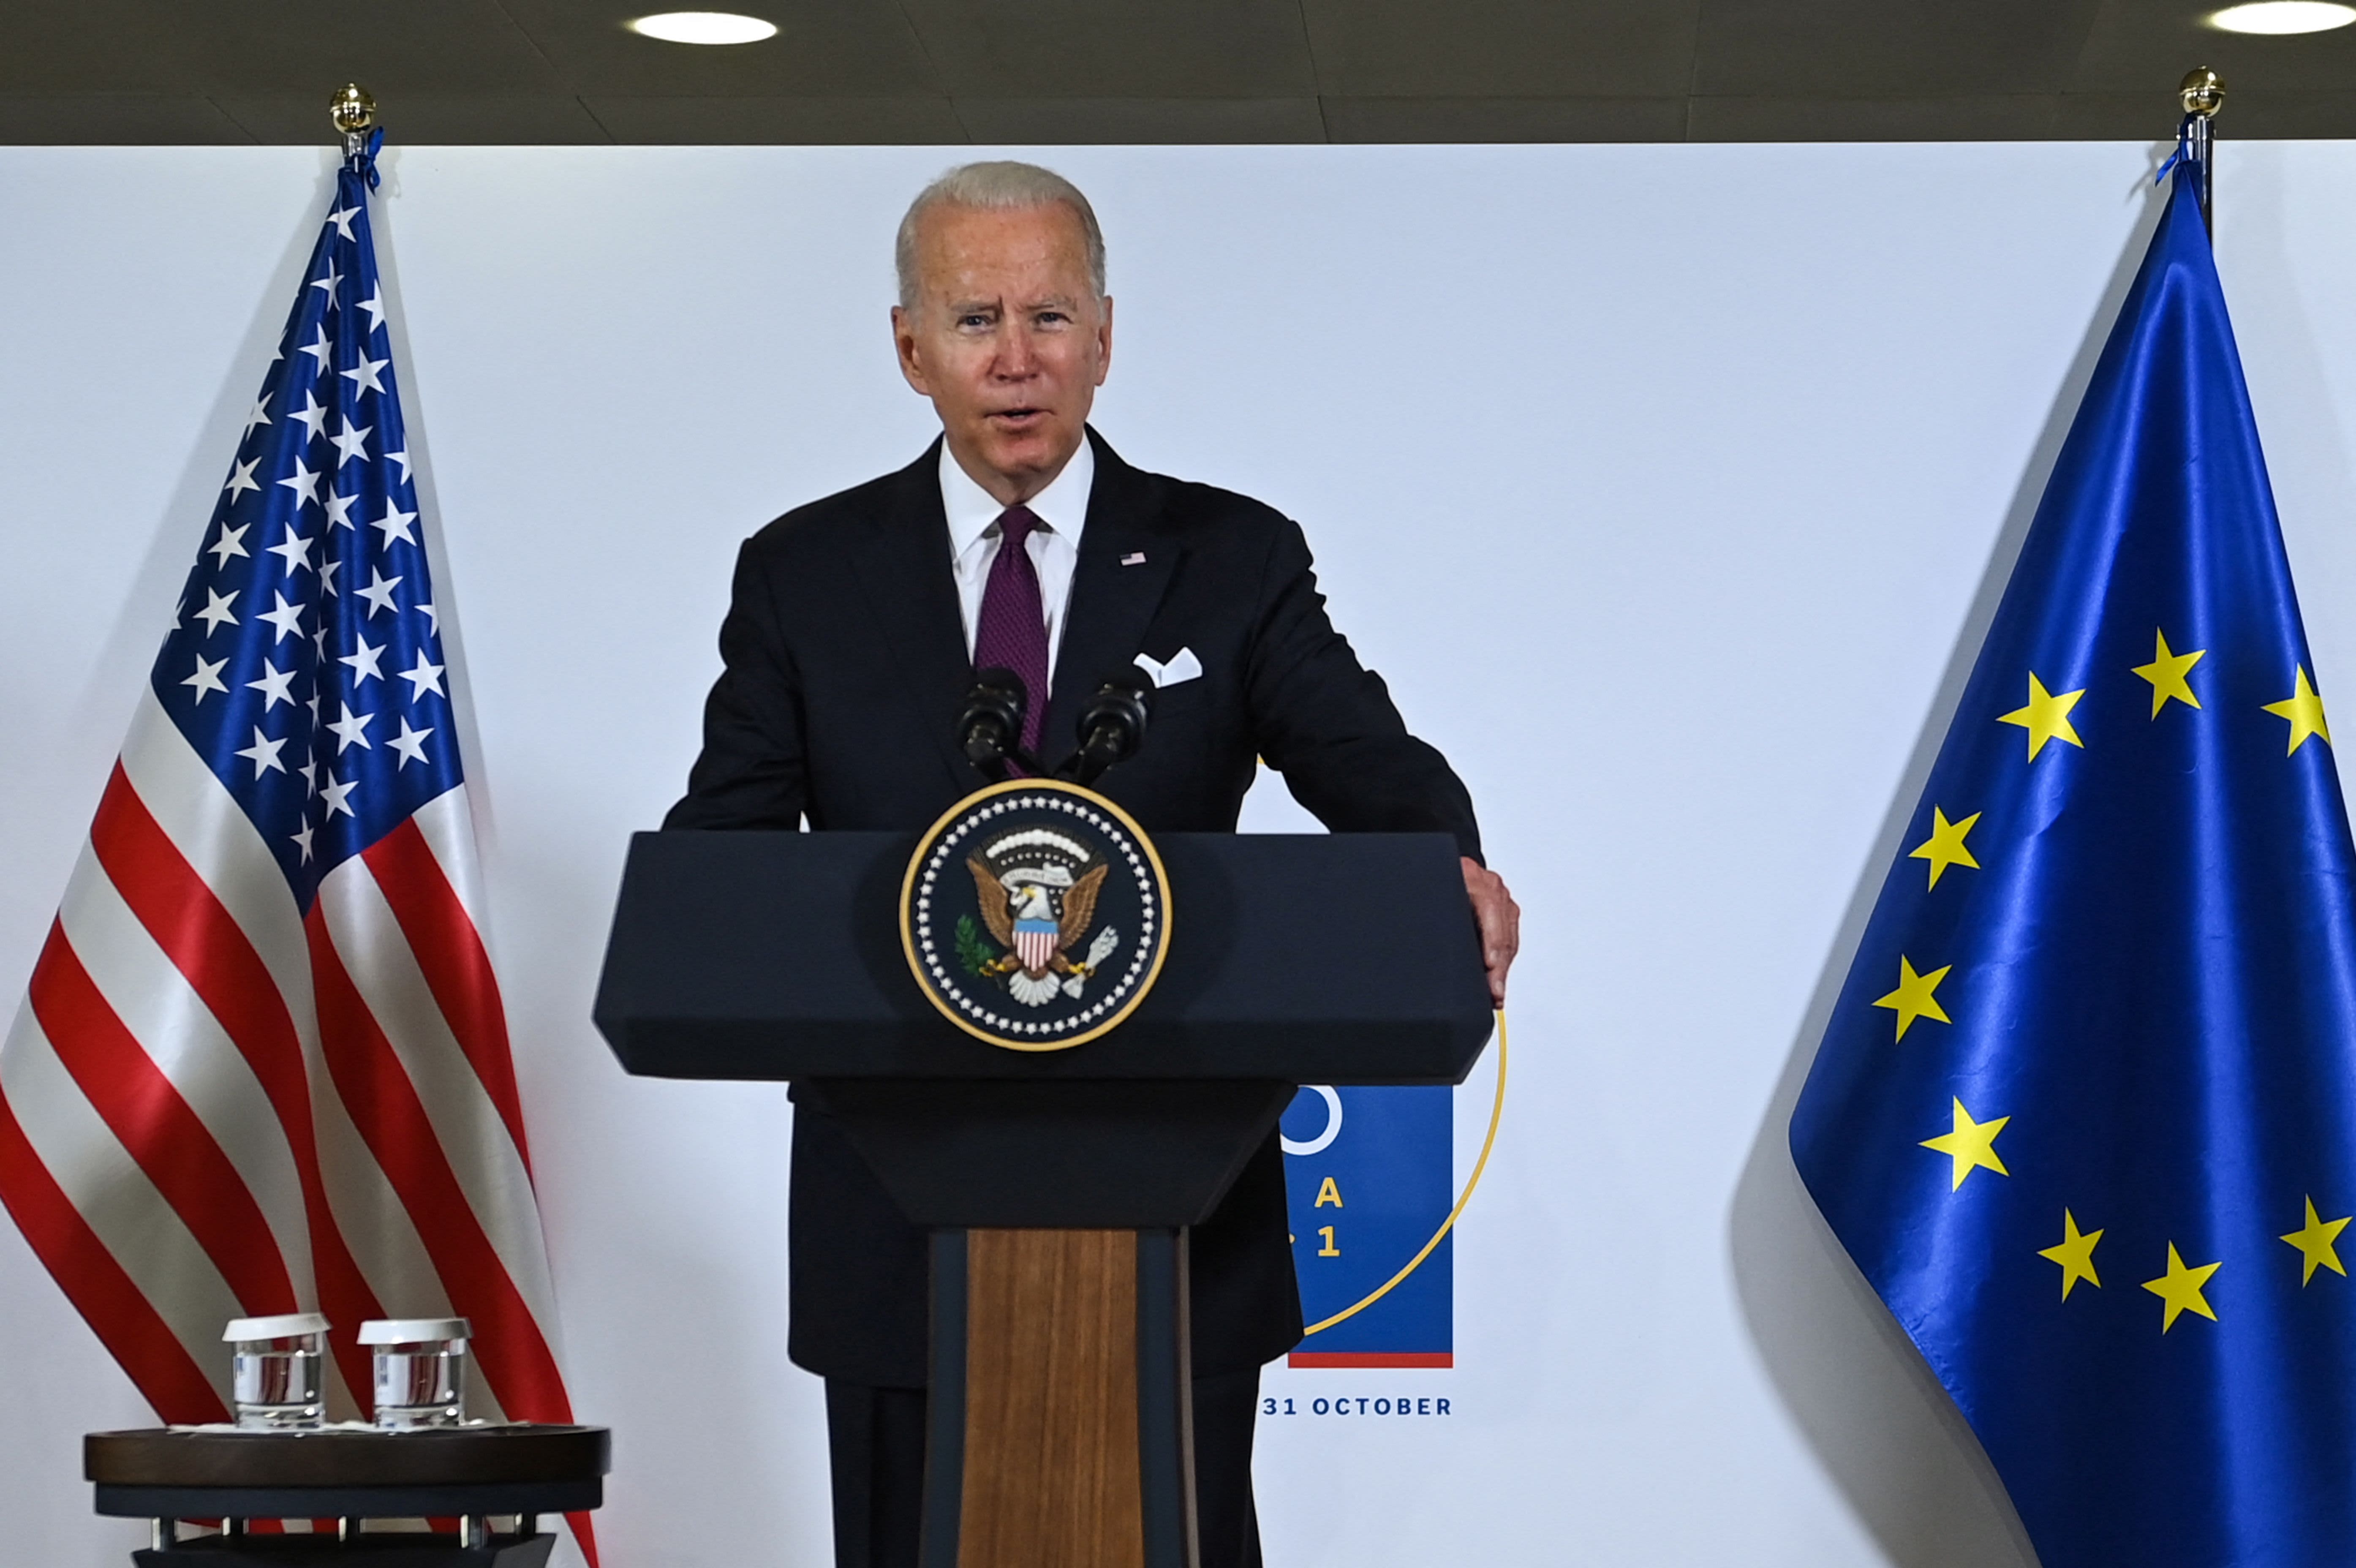 Biden rallies world leaders at G-20 to help address global supply chain issues – CNBC